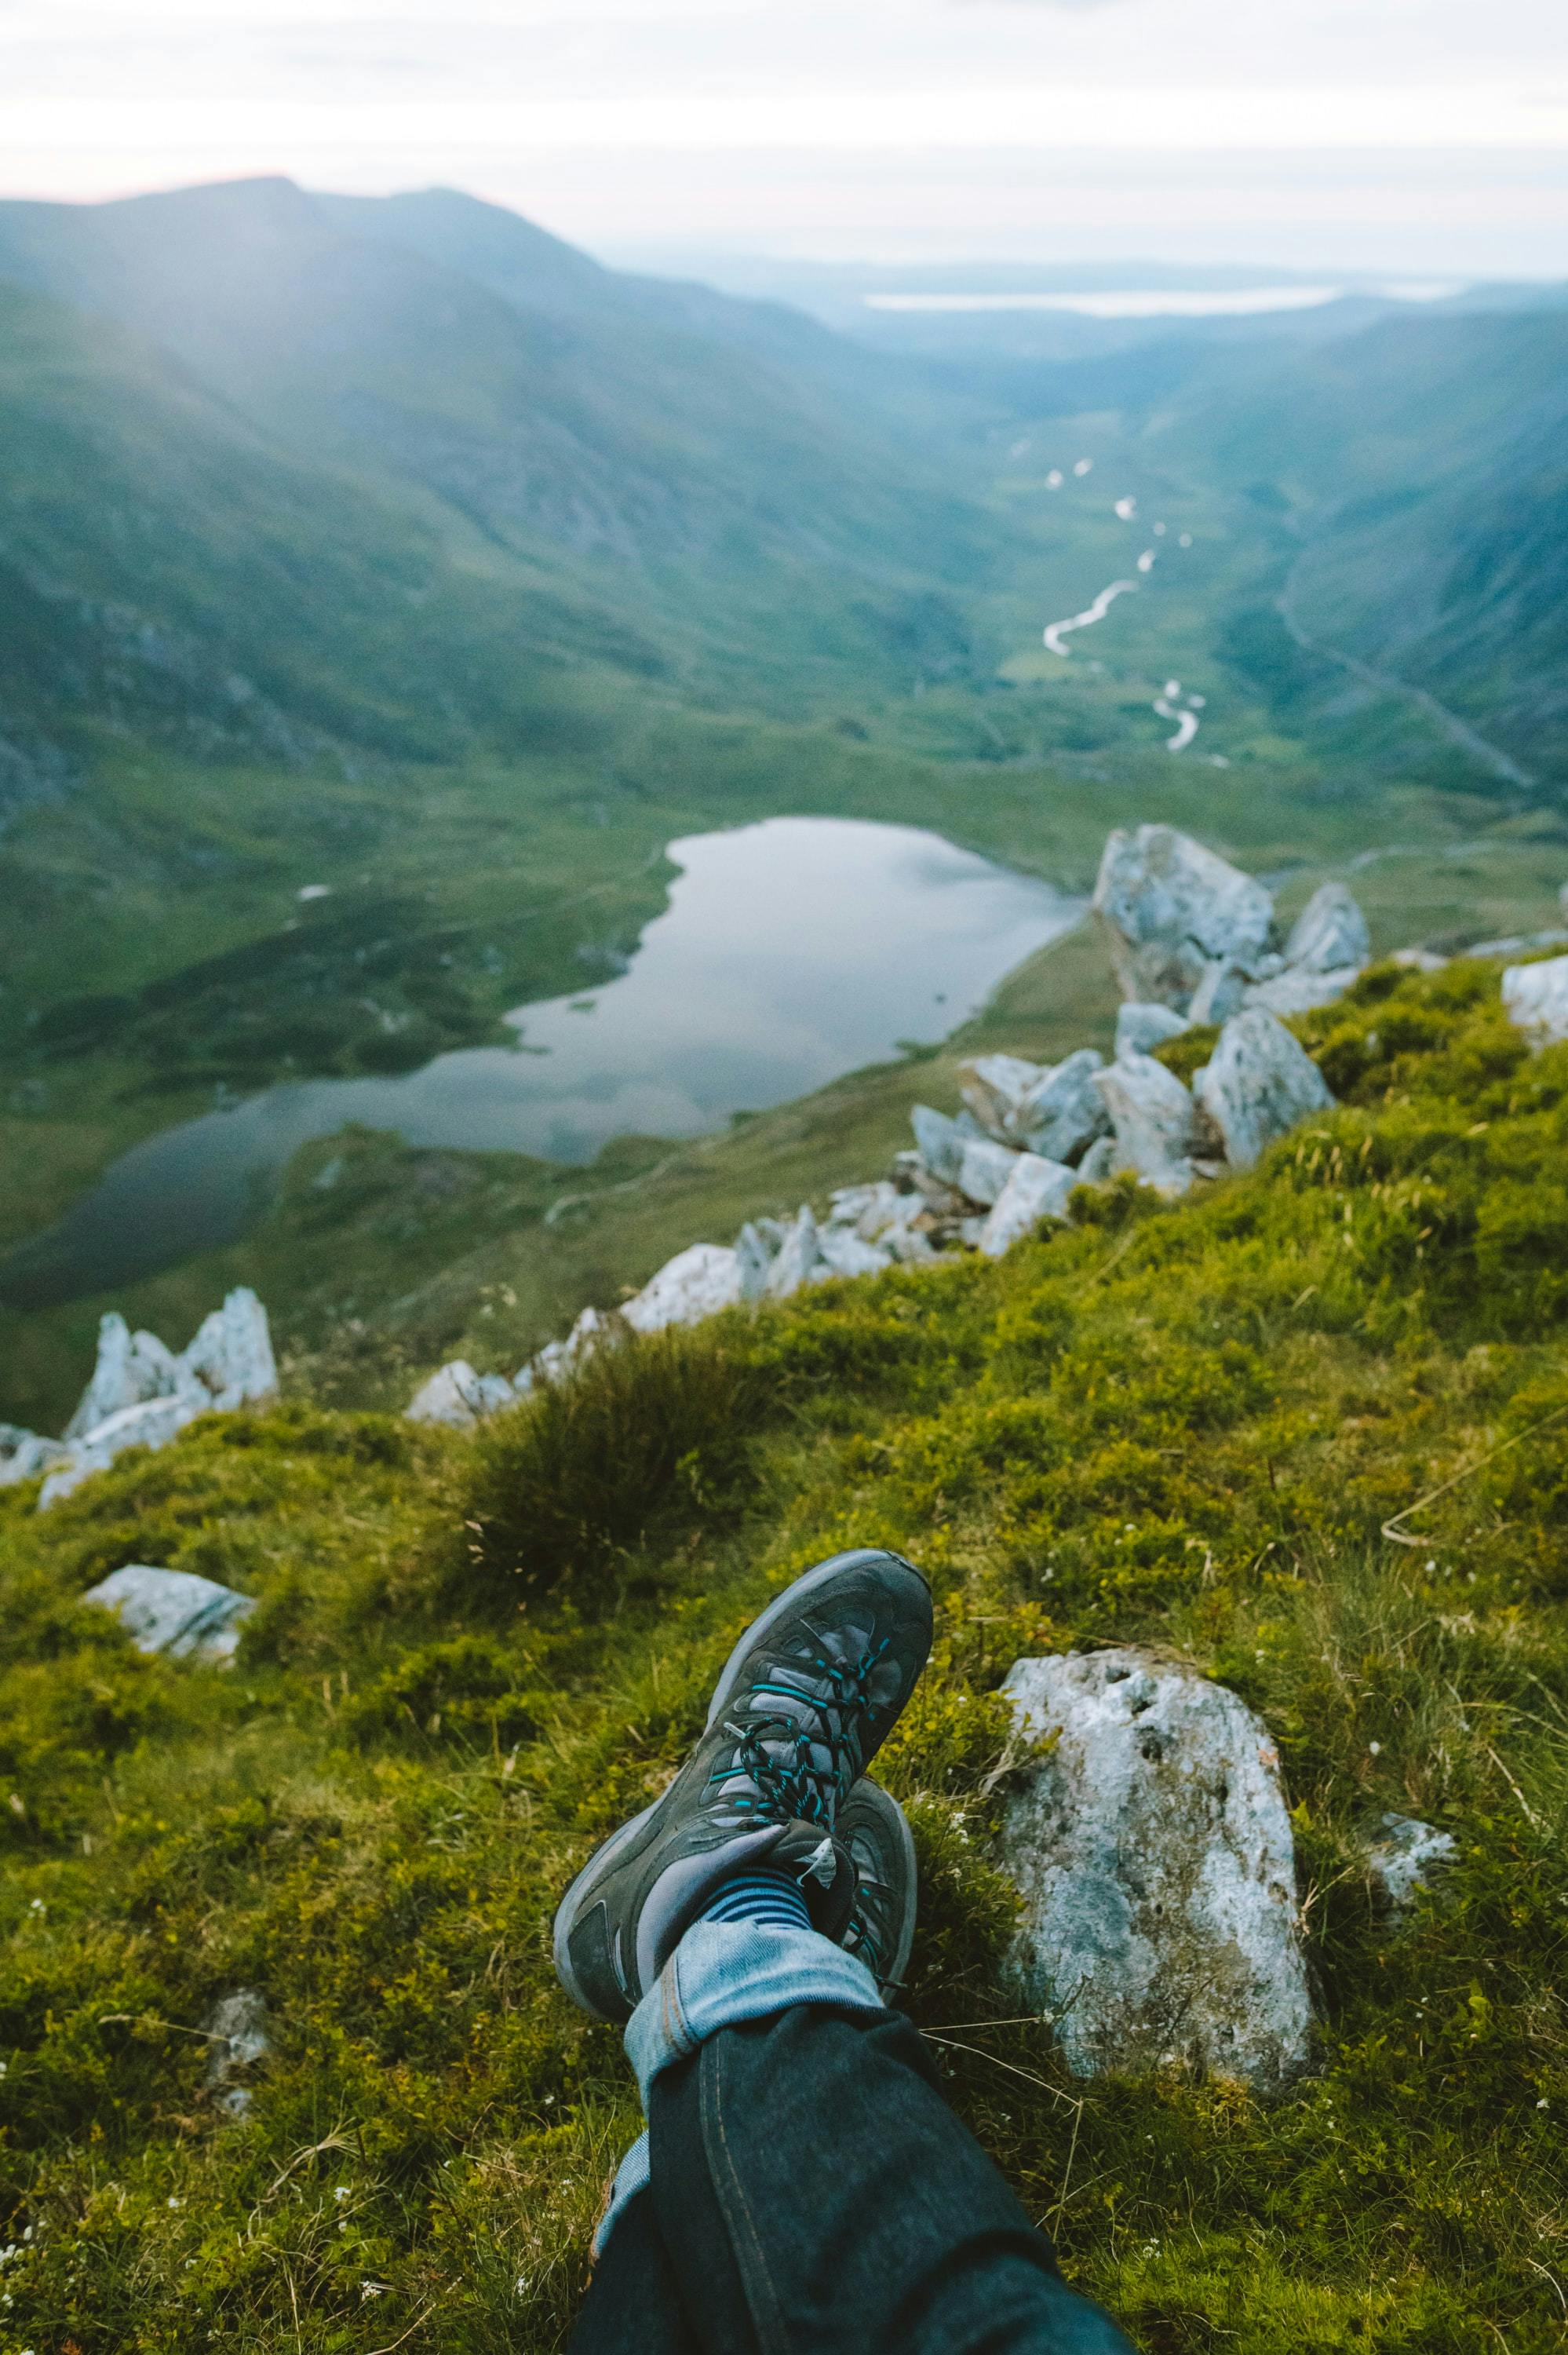 A person stretches out their legs as they sit overlooking a lake and mountains